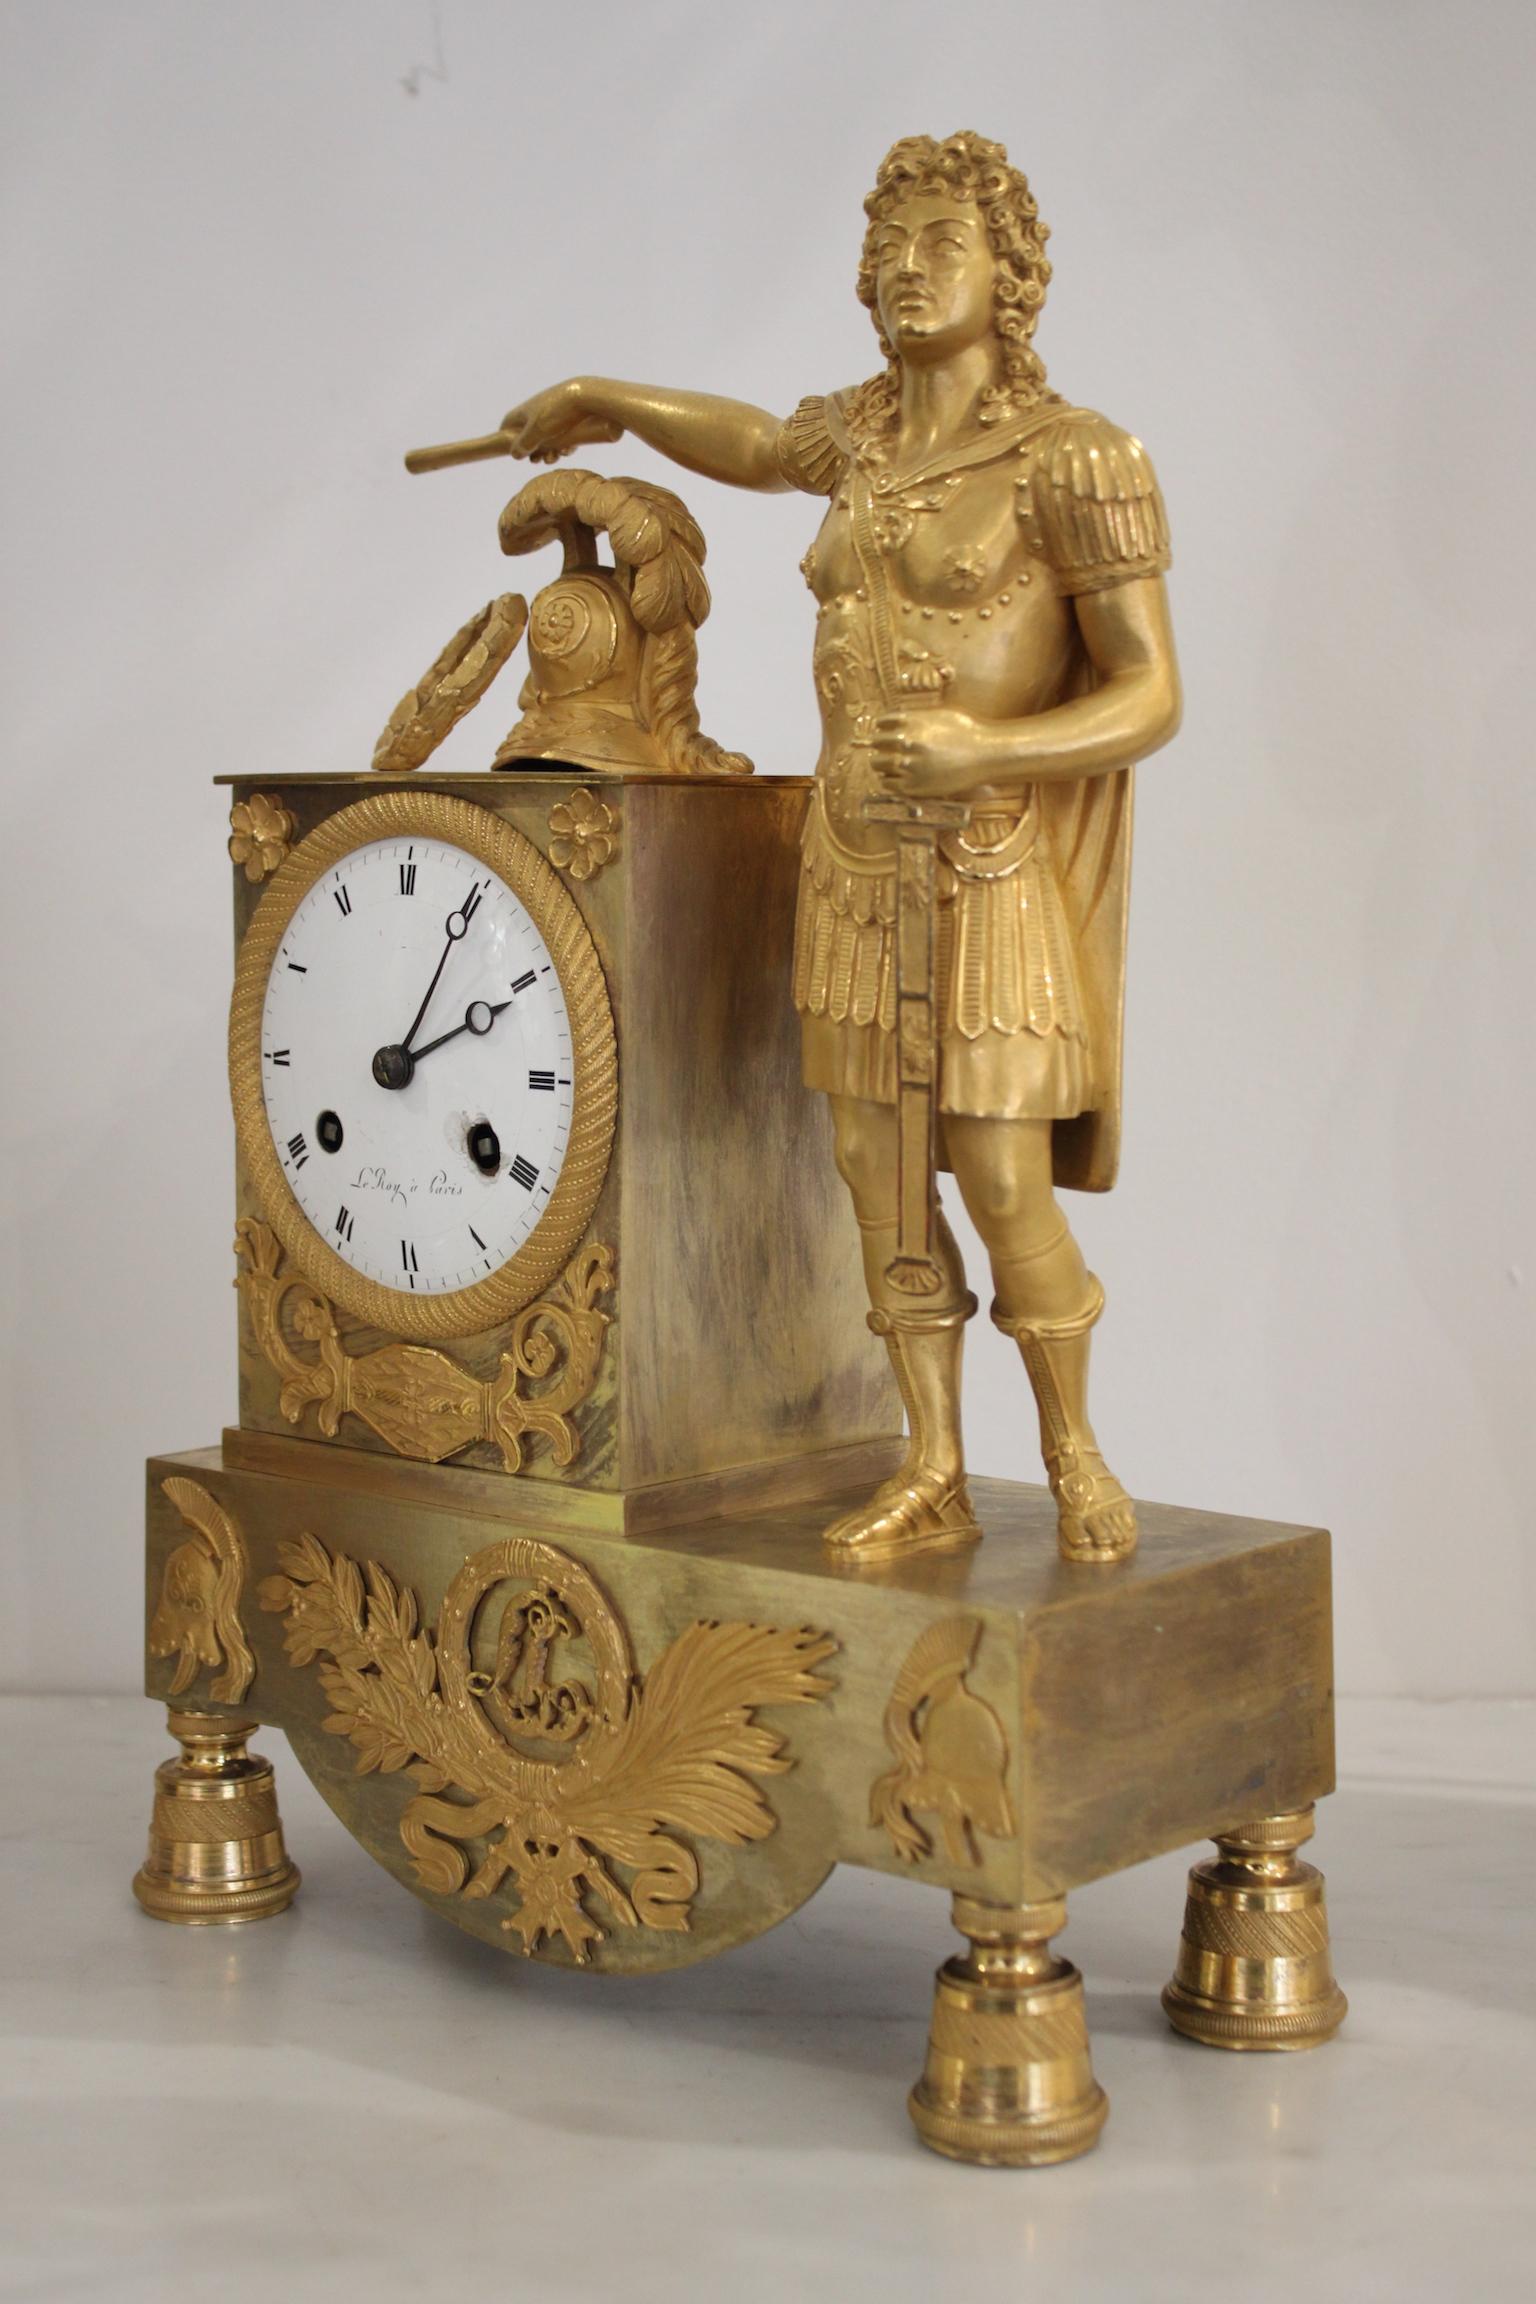 French restoration gilt bronze clock, representing Louis XIV as emperor.
On the dial 